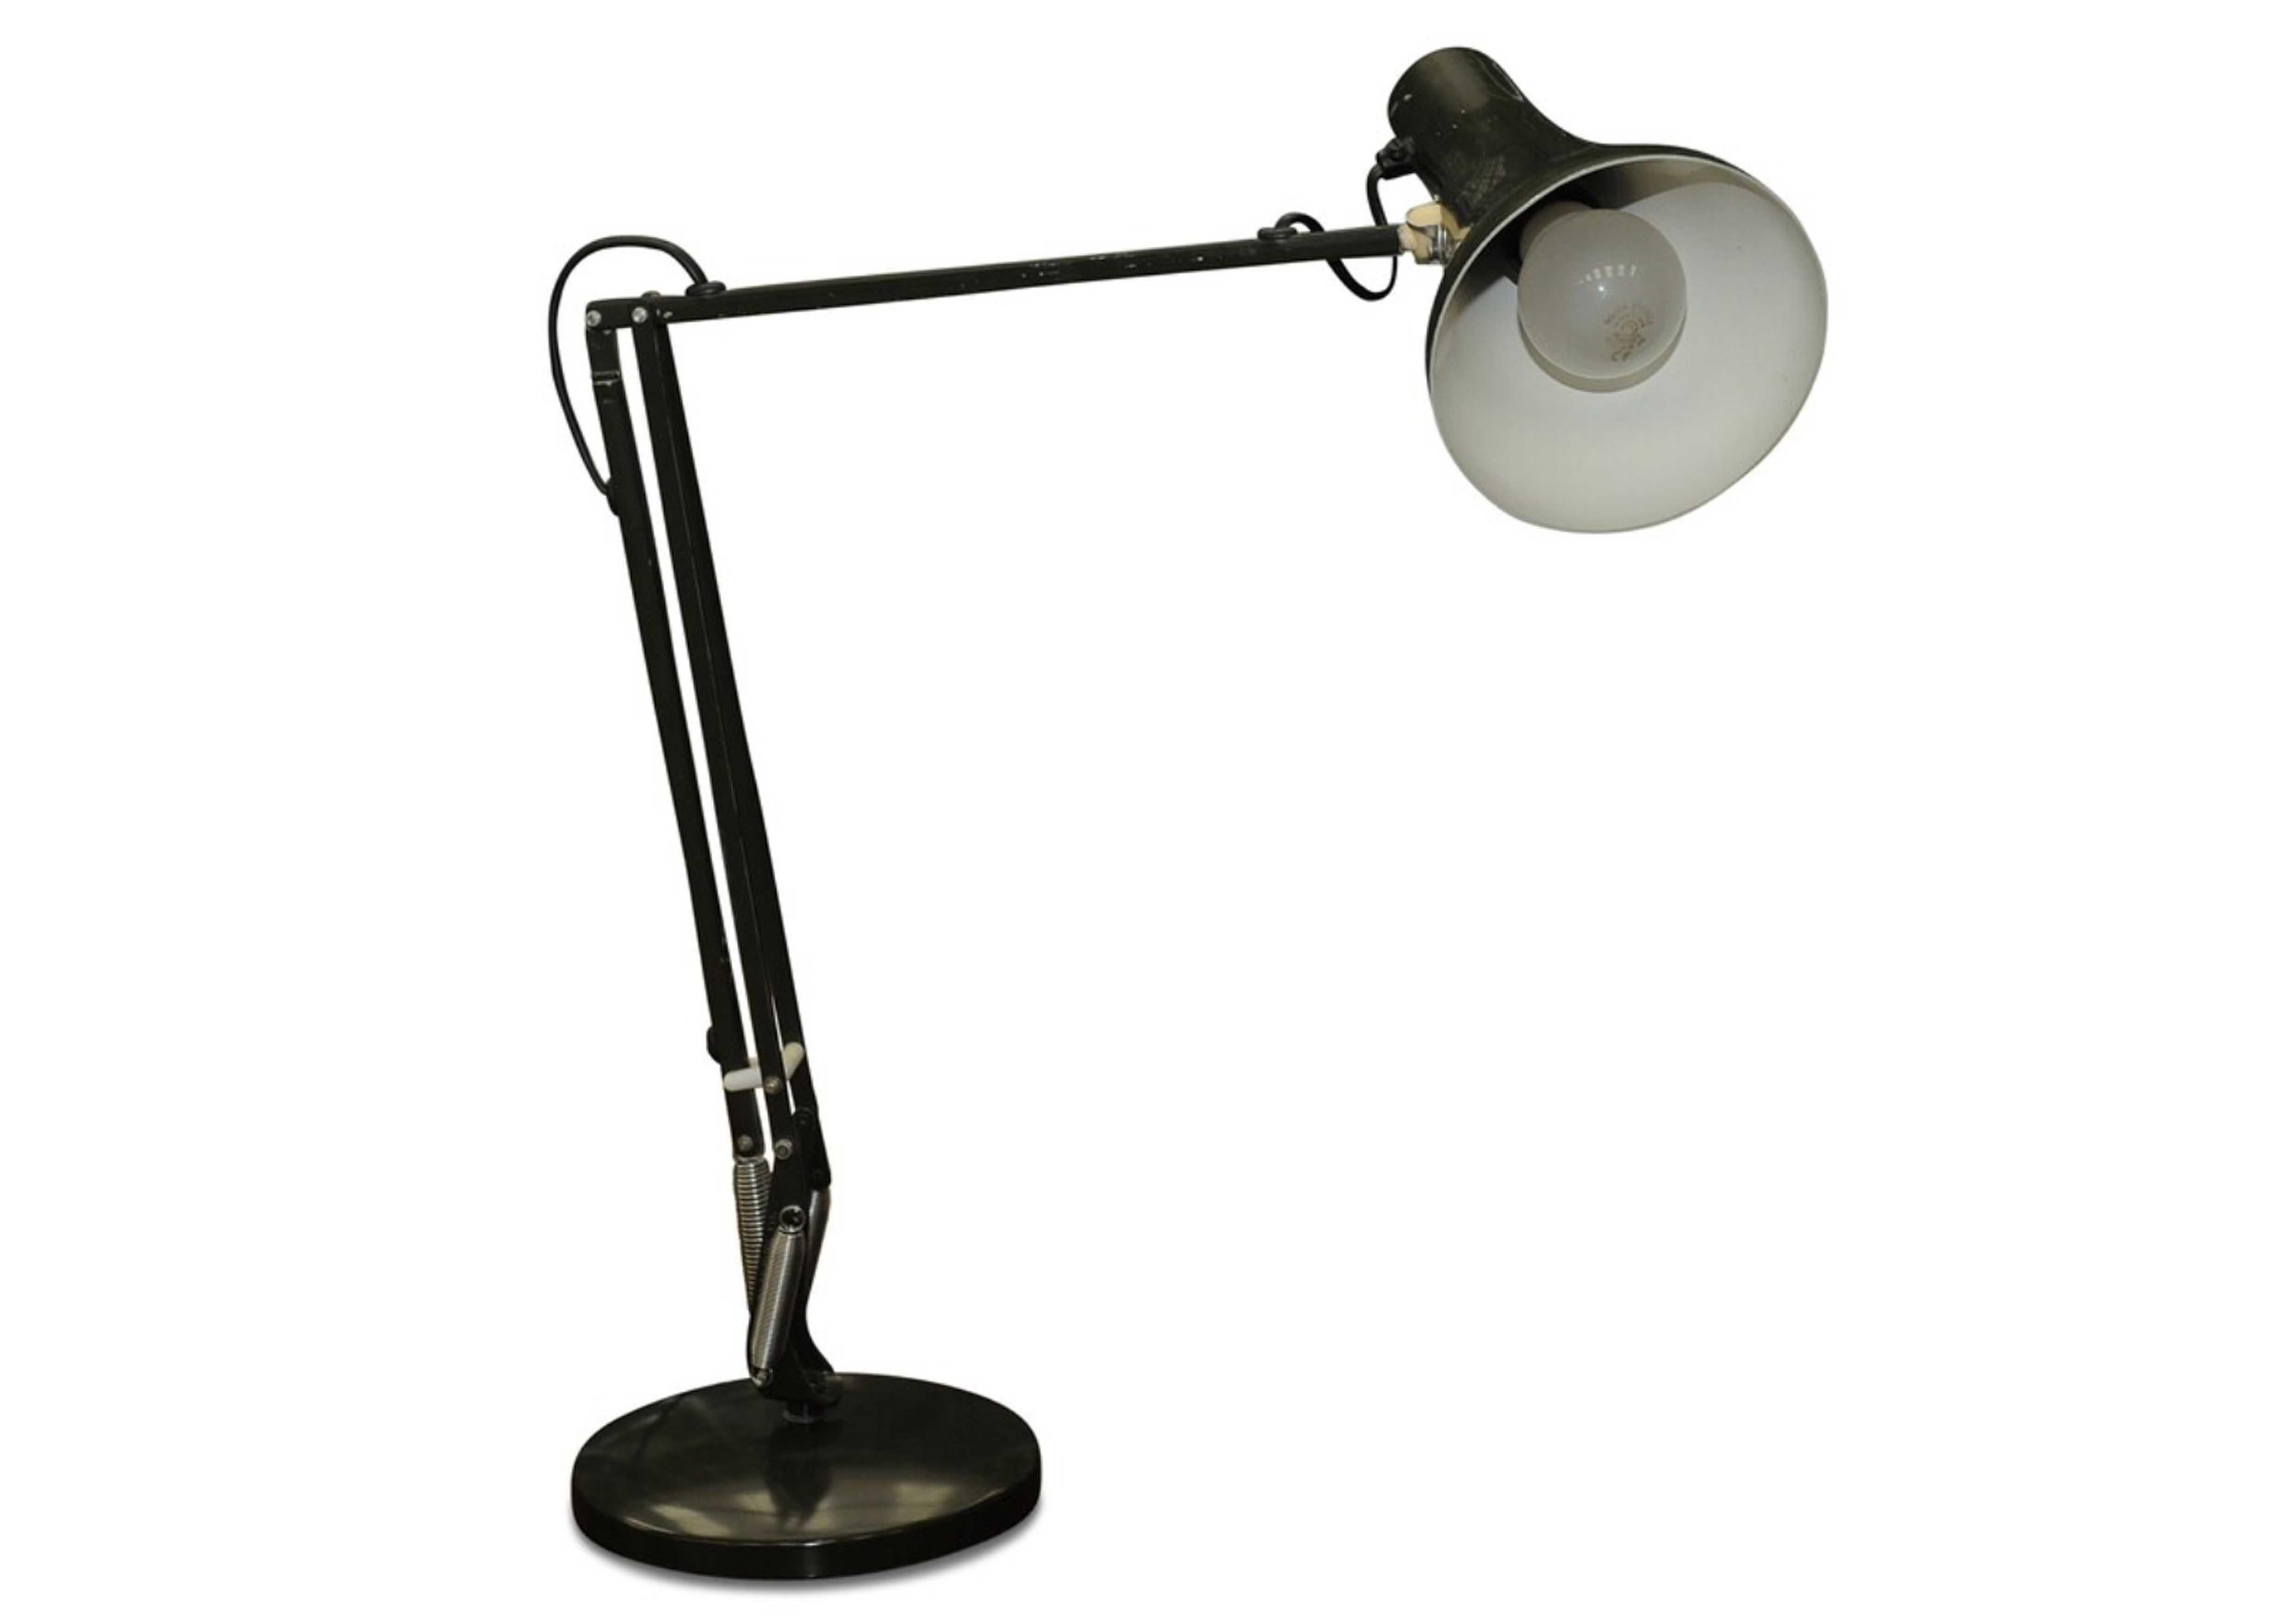 1970s anglepoise lamp